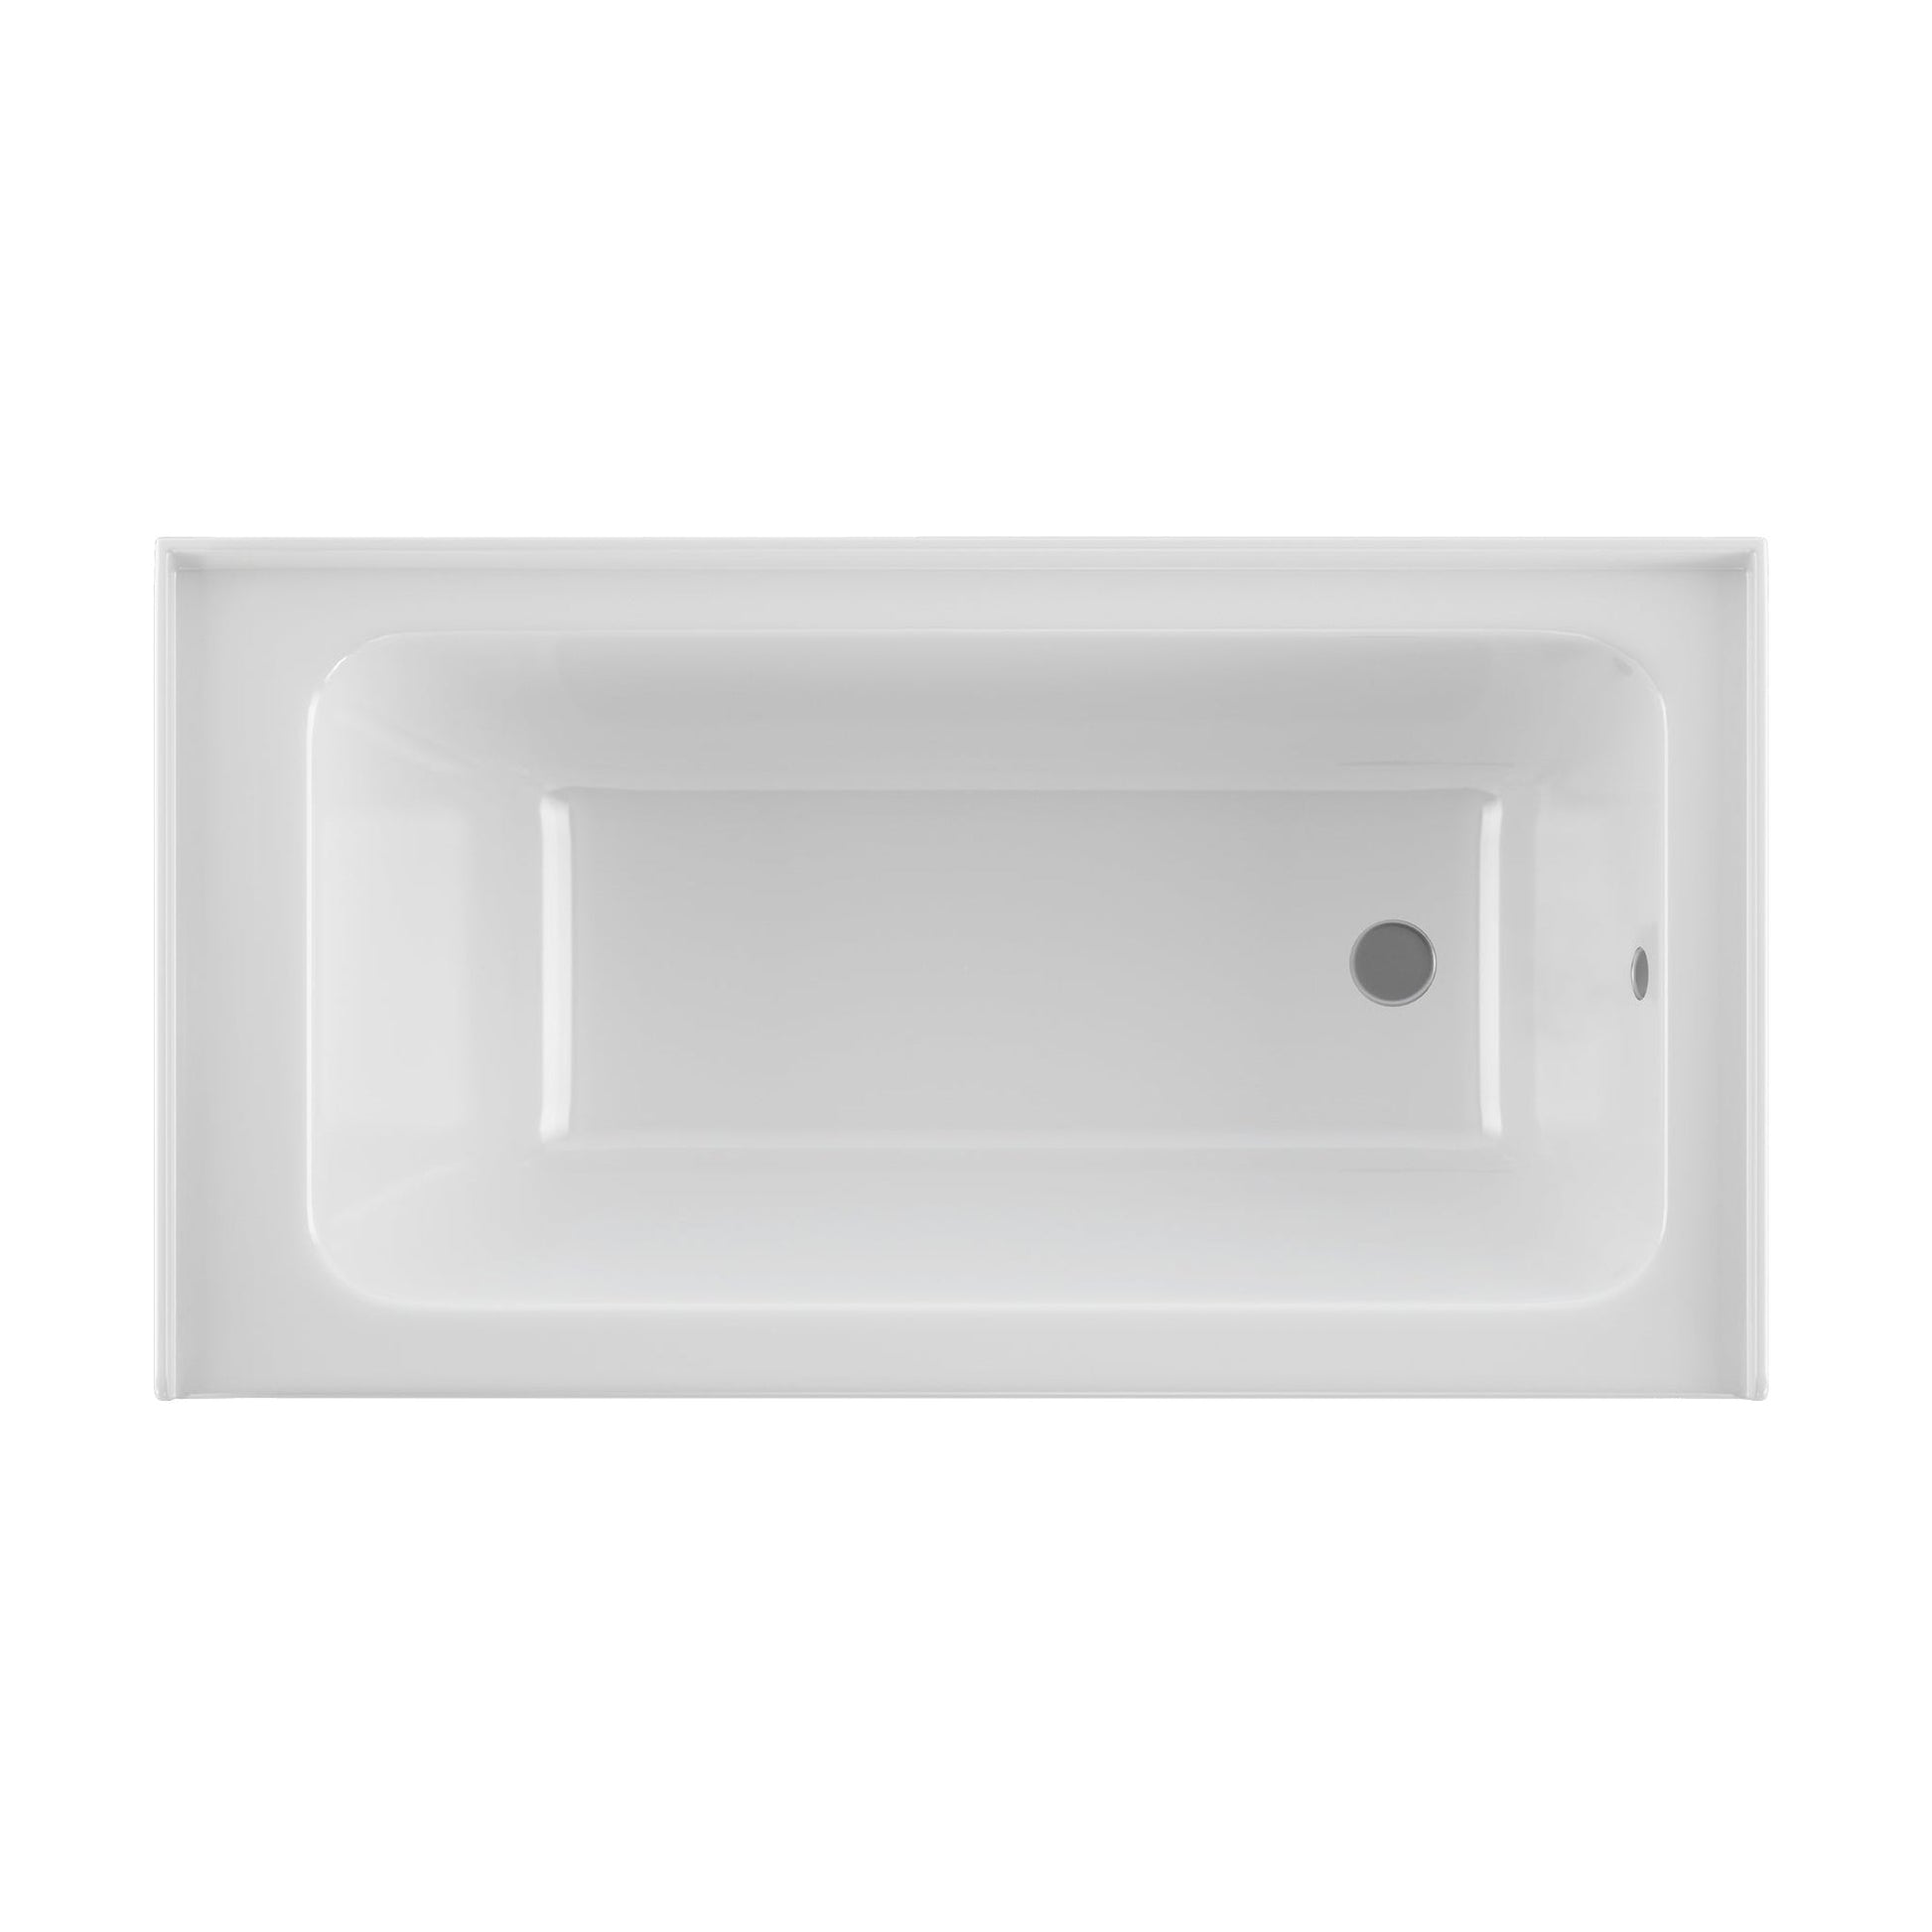 PULSE ShowerSpas 60" W x 30" D Rectangular Glossy White Acrylic Finish Right Drain Placement Alcove Tub